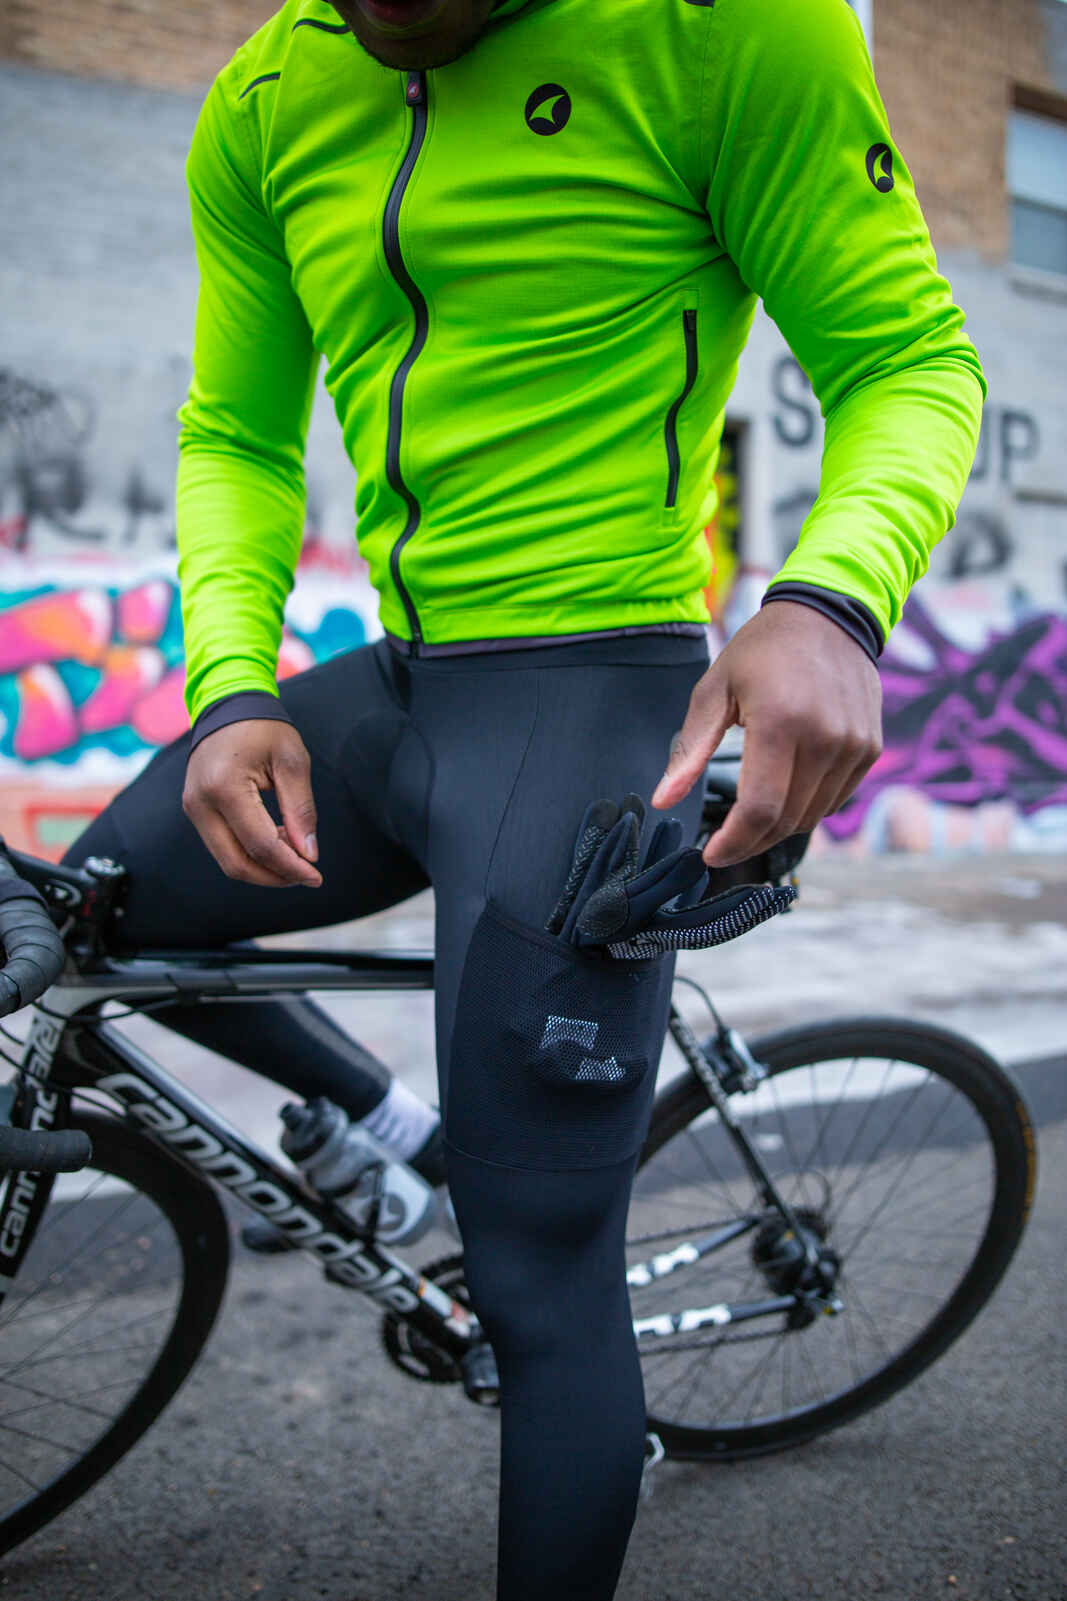 Men's Thermal Cycling Bib Tights for Cool/Cold Weather